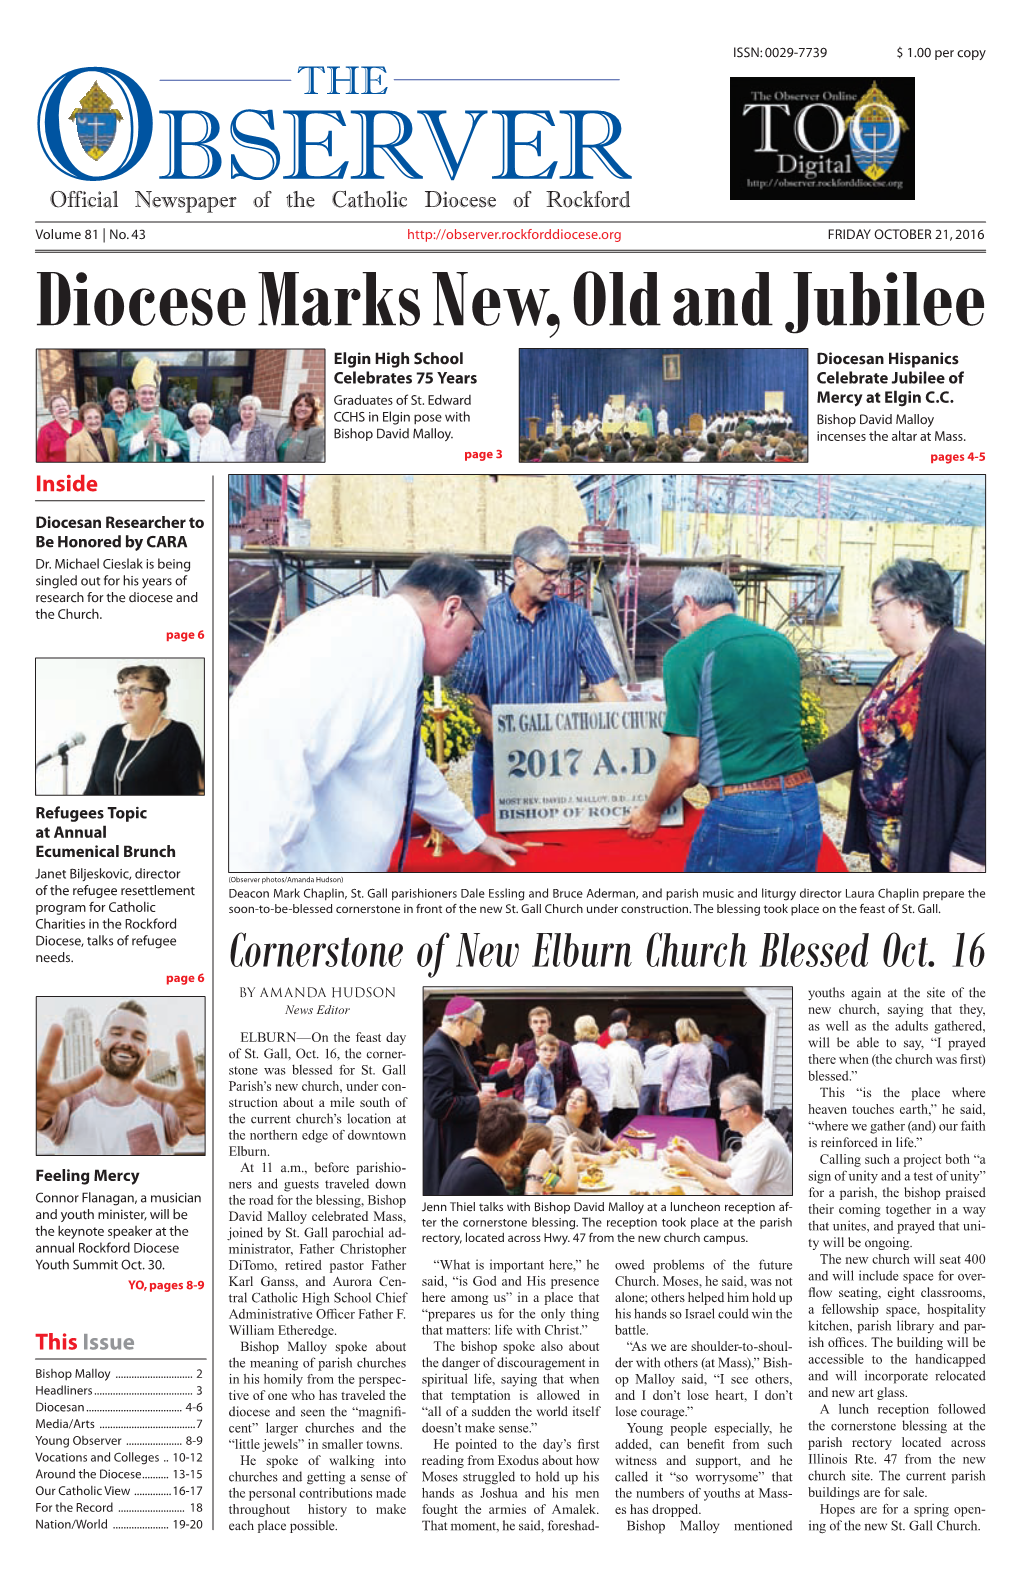 Diocese Marks New, Old and Jubilee Elgin High School Diocesan Hispanics Celebrates 75 Years Celebrate Jubilee of Graduates of St